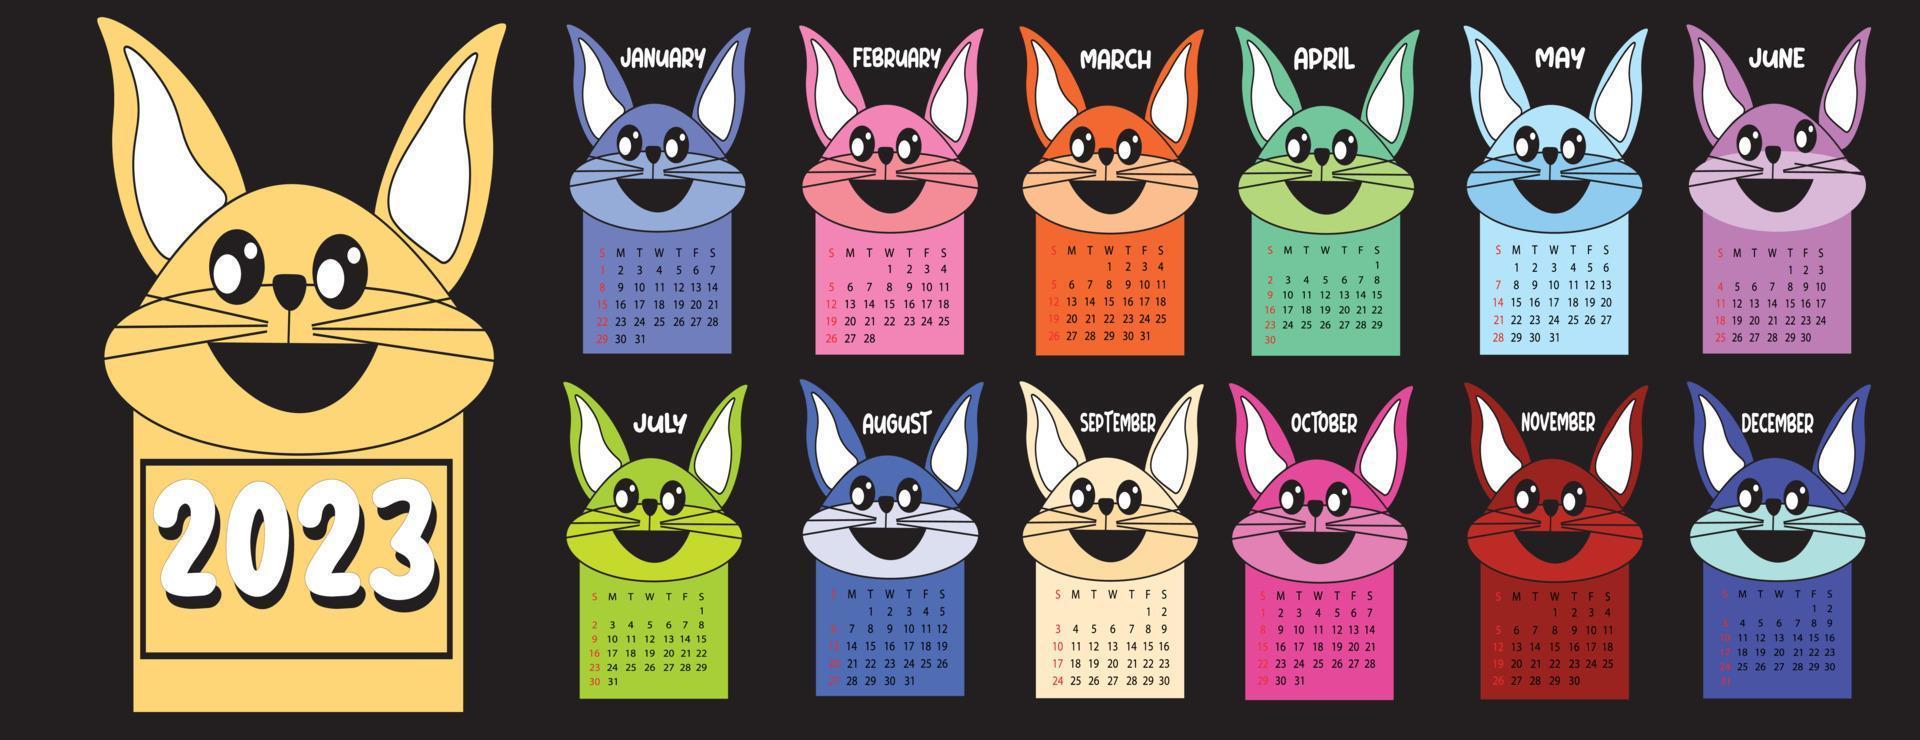 Rabbit calendar template for 2023. Vertical design with bright and cute simple illustrations of cute rabbit. vector